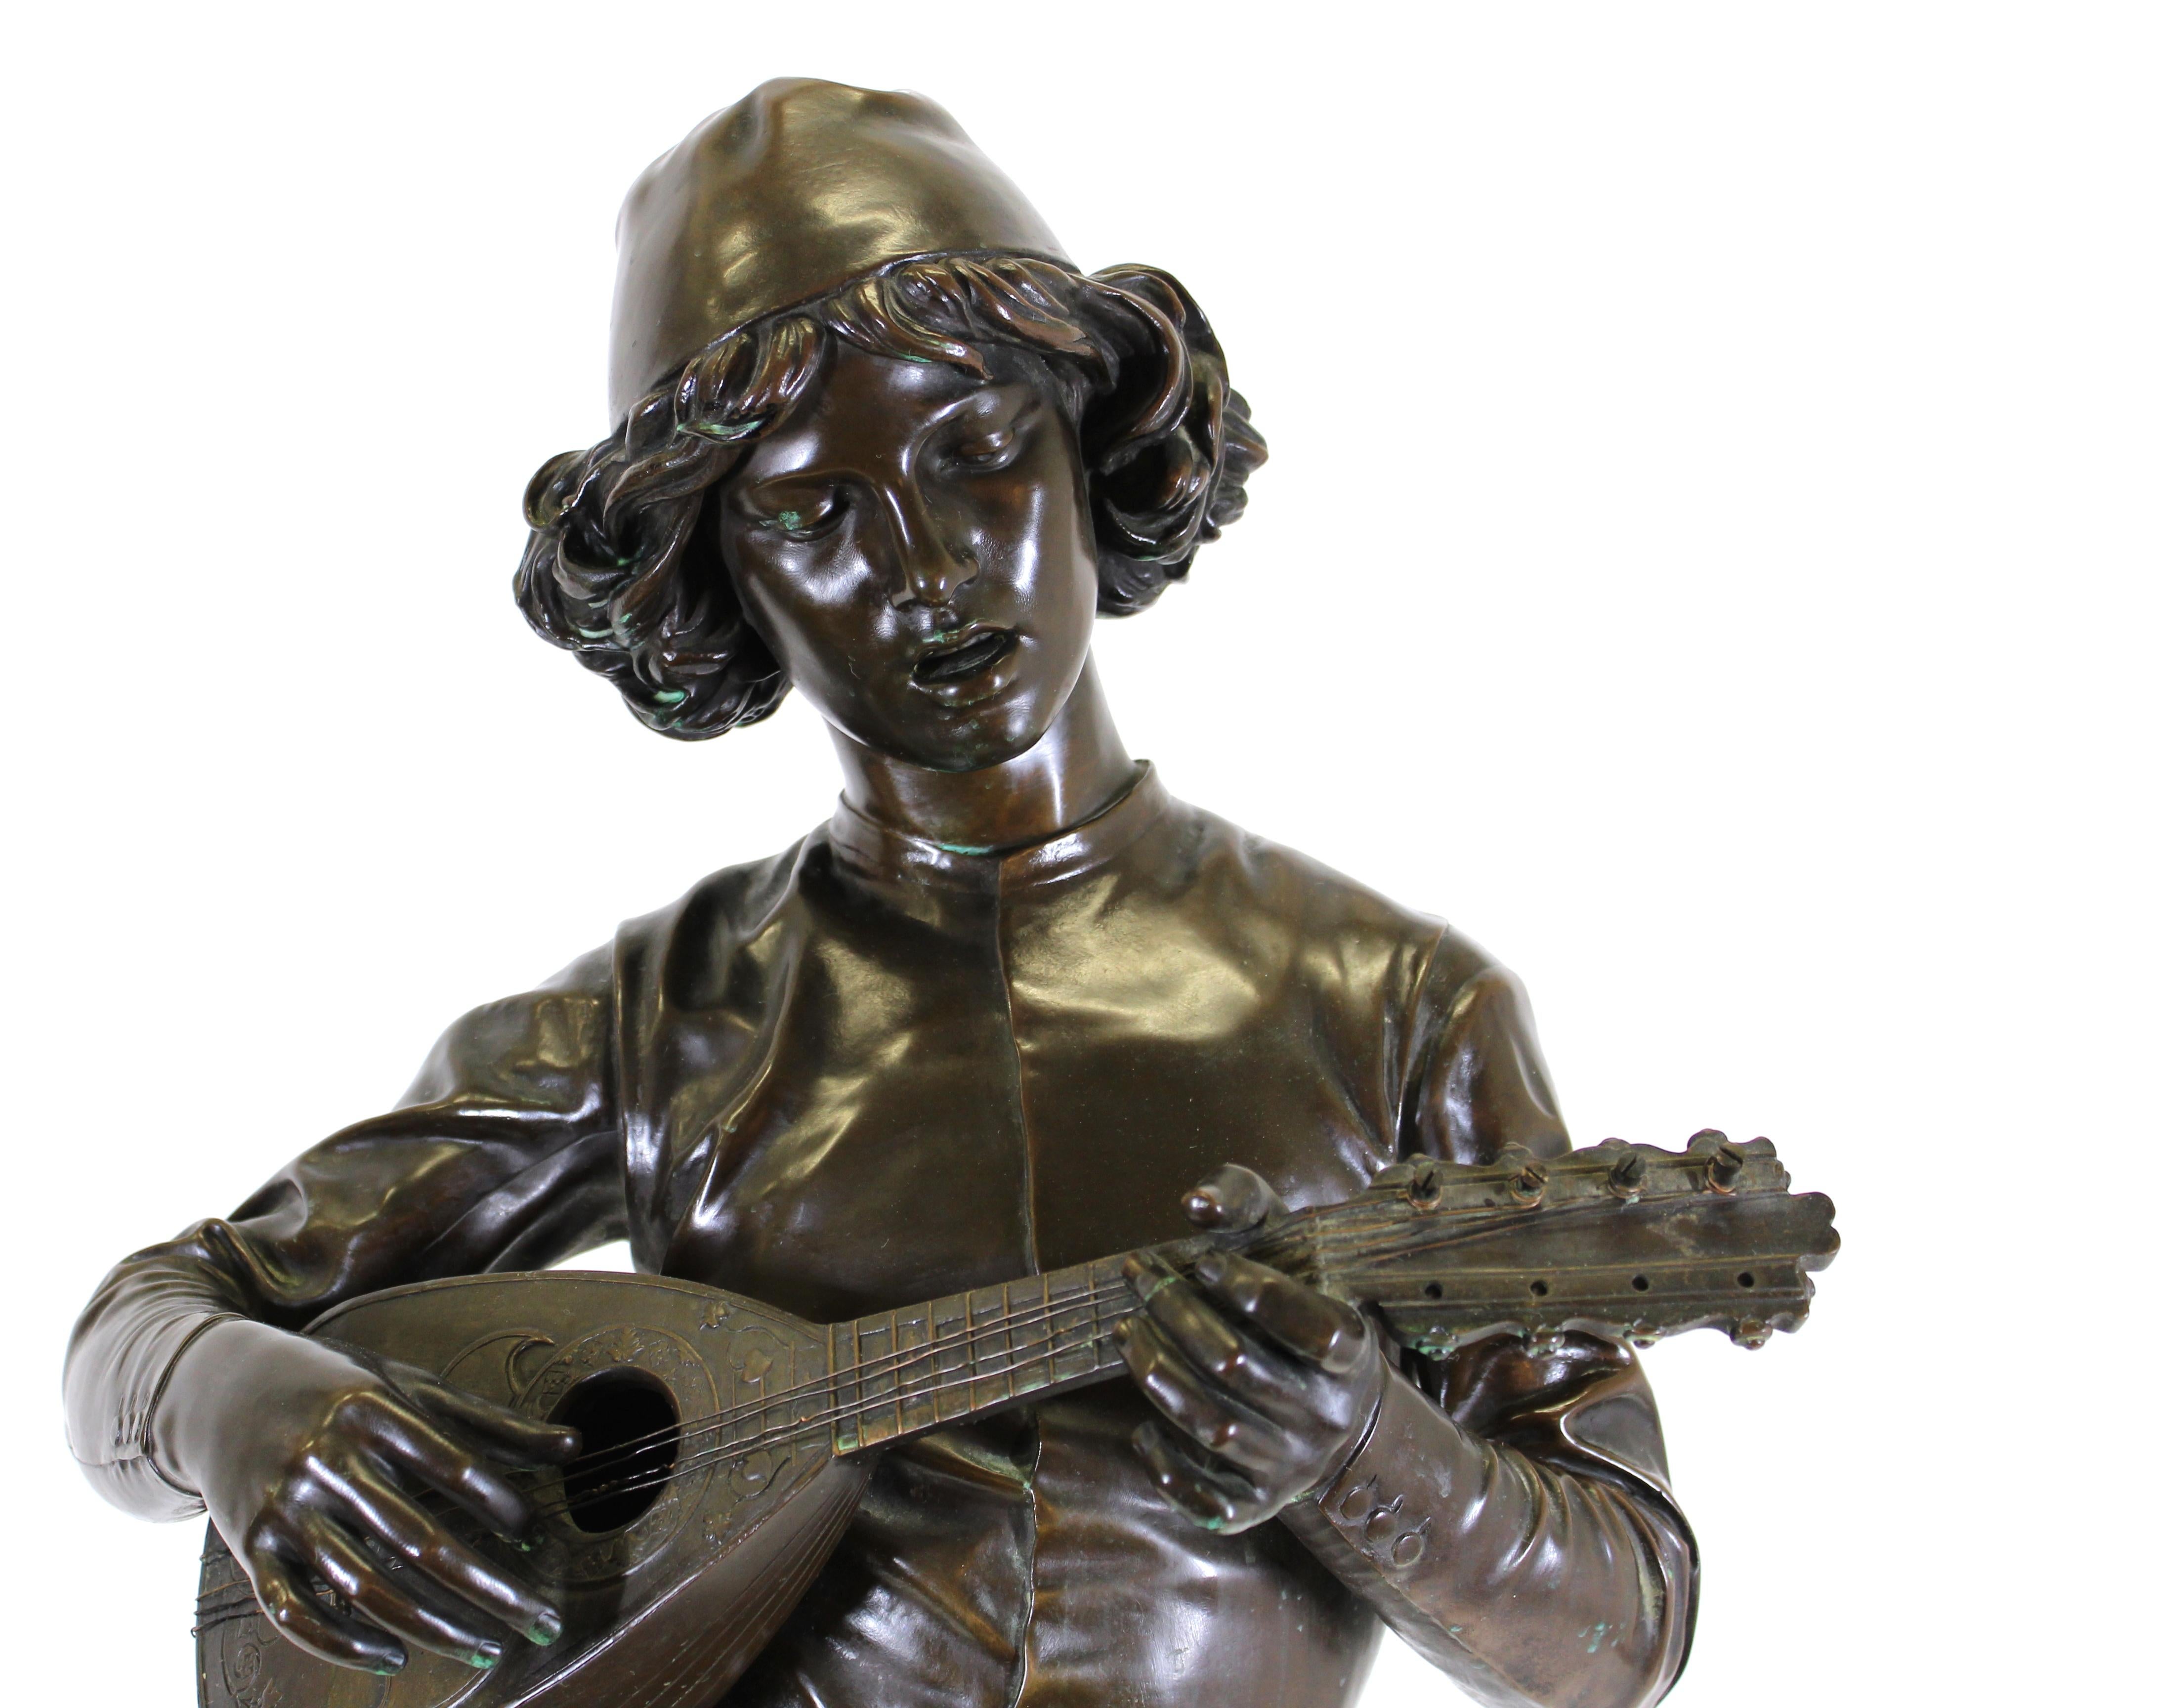 Paul Dubois (French 1829 –1905) 'Florentine Singer' French Romantic period cast bronze sculpture, after the original by Dubois in 1865, mechanical reduction by A. Collas, cast by Barbedienne, late 19th century. Foundry stamp: 